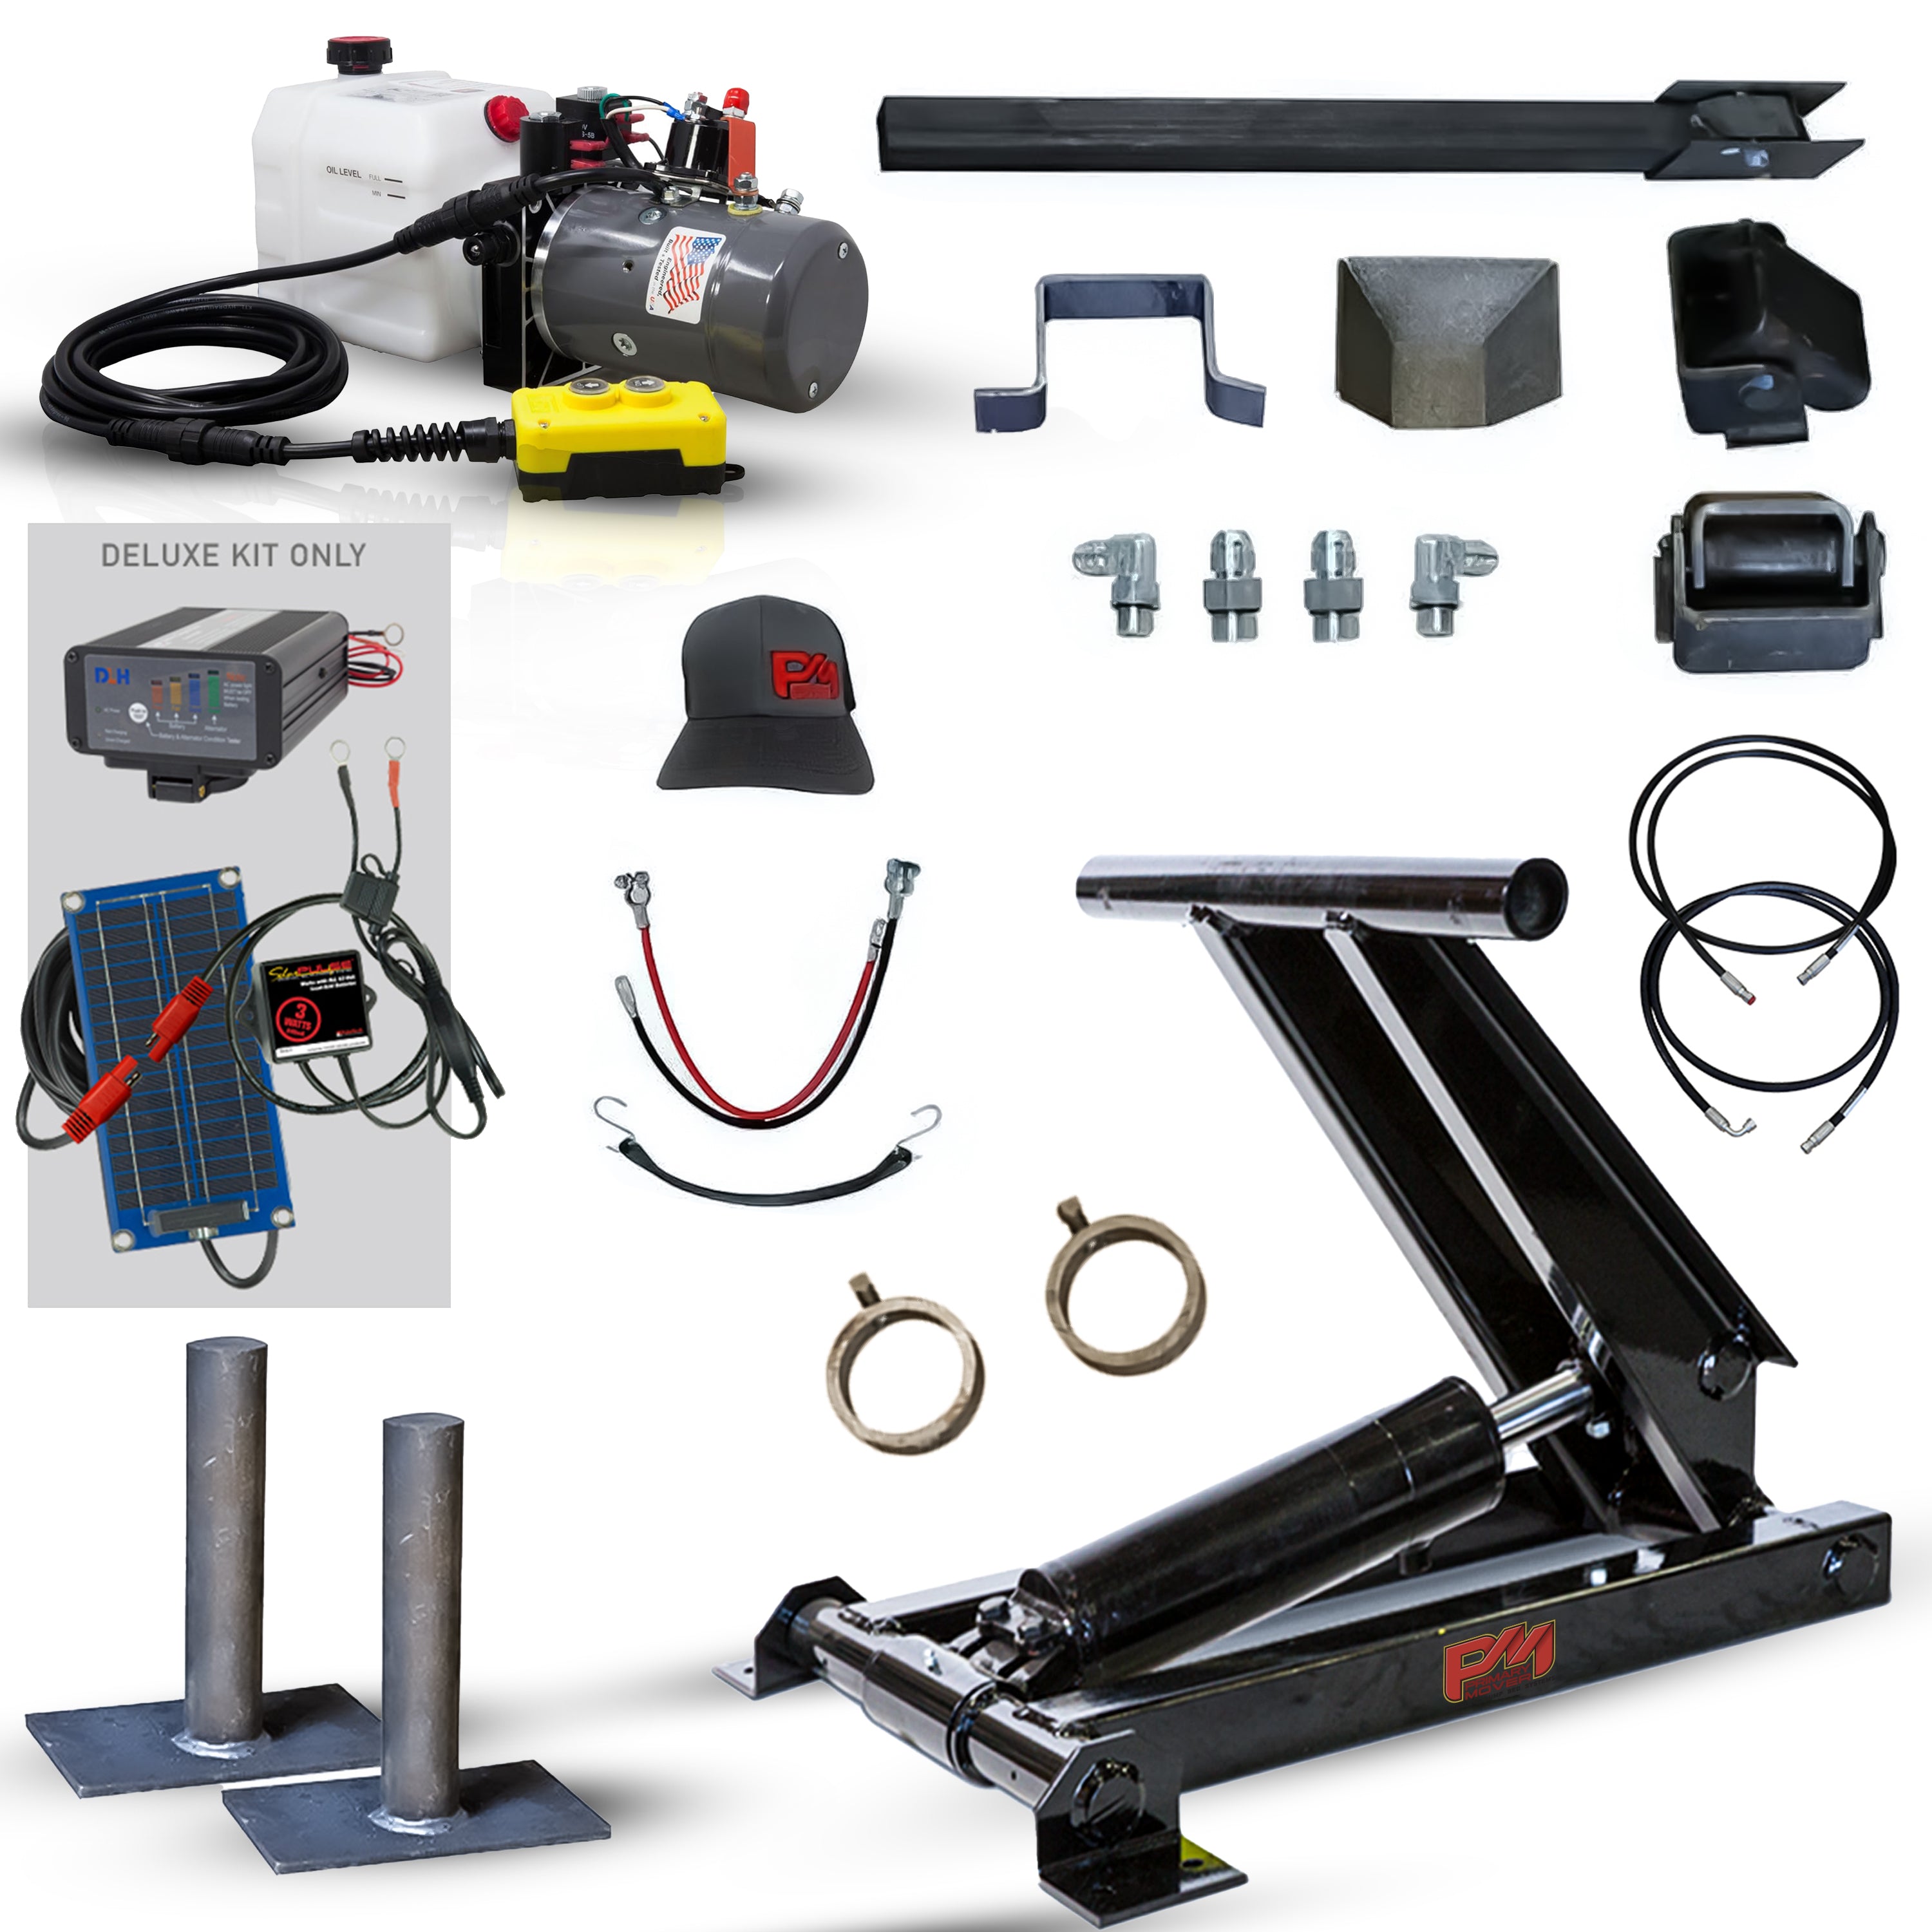 Hydraulic Scissor Hoist Kit - 3 Ton Capacity for 8-10' Dump Trailers. Includes cylinder, mounting brackets, hydraulic pump, safety features, and more. Reliable and durable with a 3-year warranty.